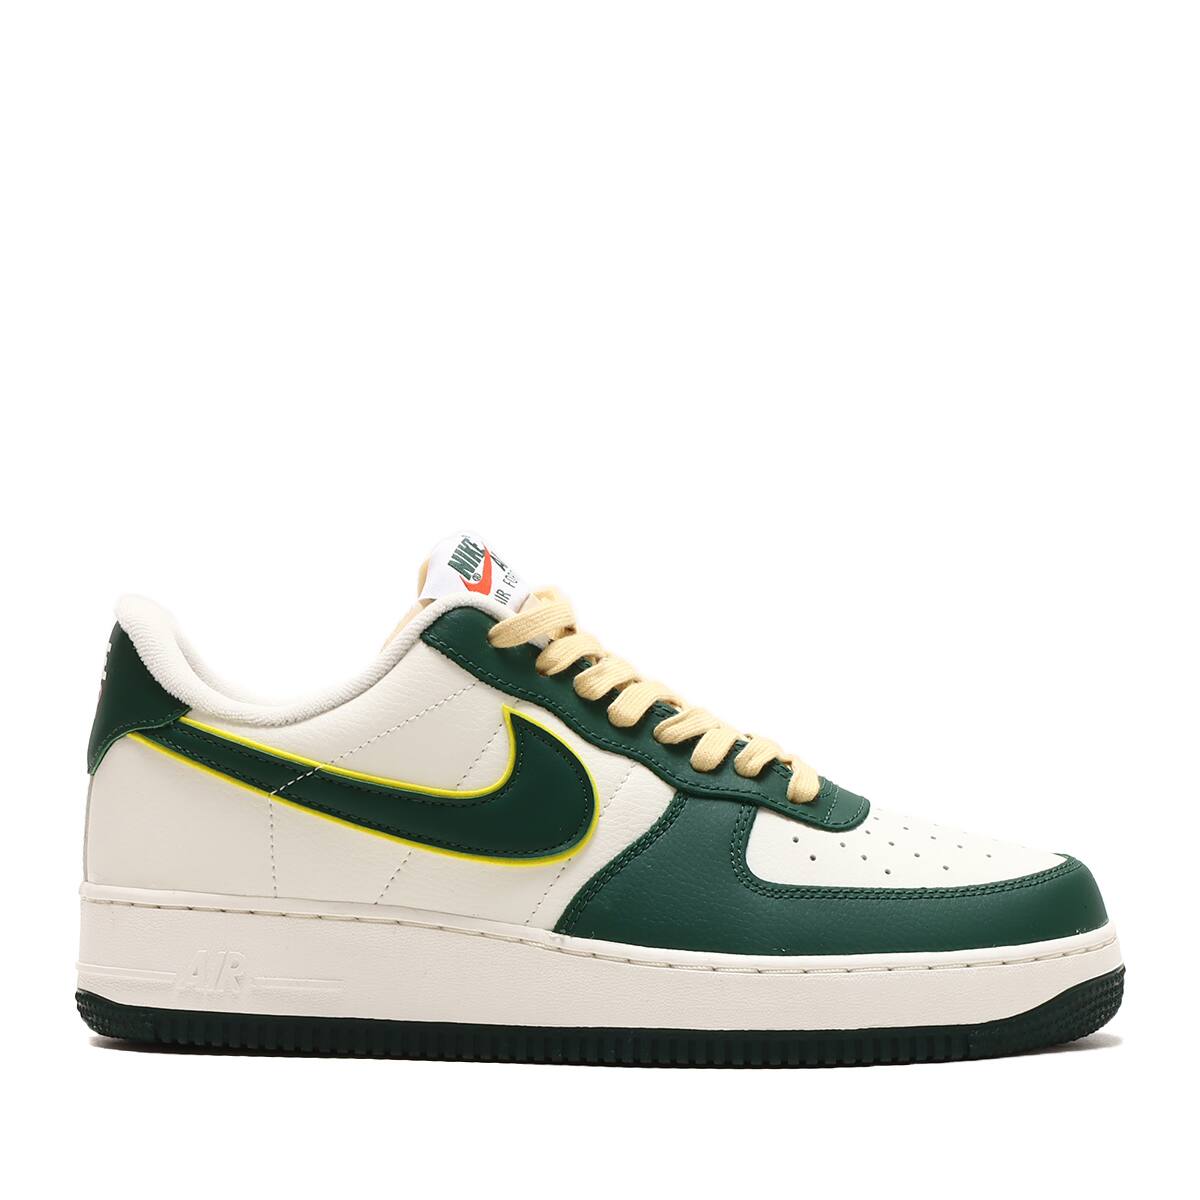 NIKE AIR FORCE 1 '07 LV8 SAIL/NOBLE GREEN-OPTI YELLOW-PICANTE RED